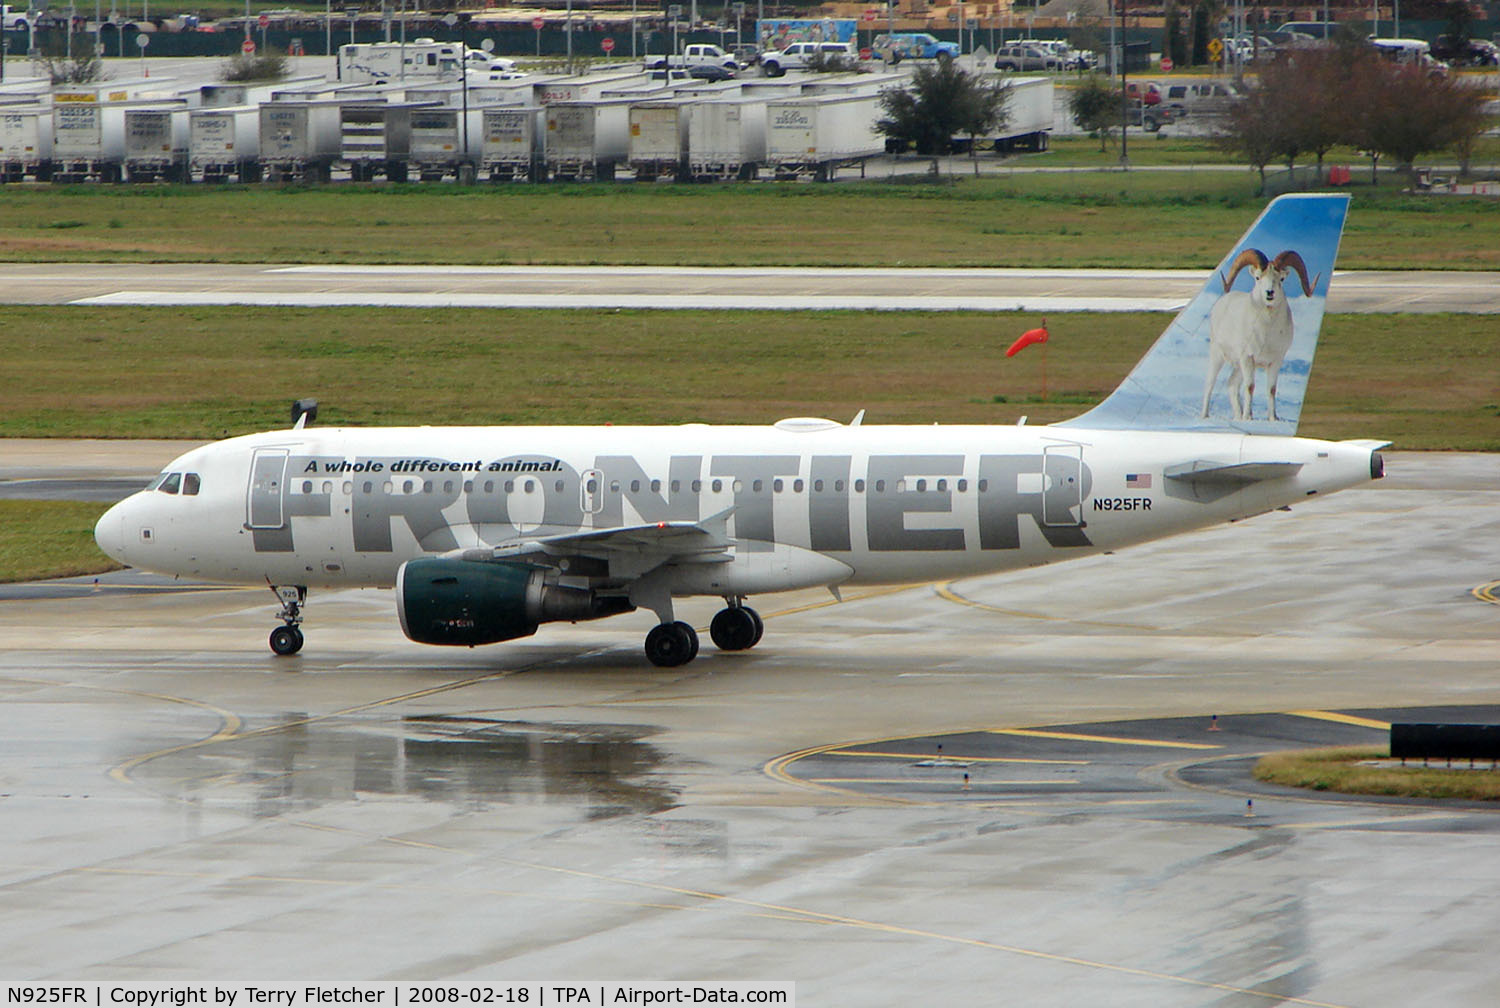 N925FR, 2004 Airbus A319-111 C/N 2103, Frontier A319 arrives at Tampa